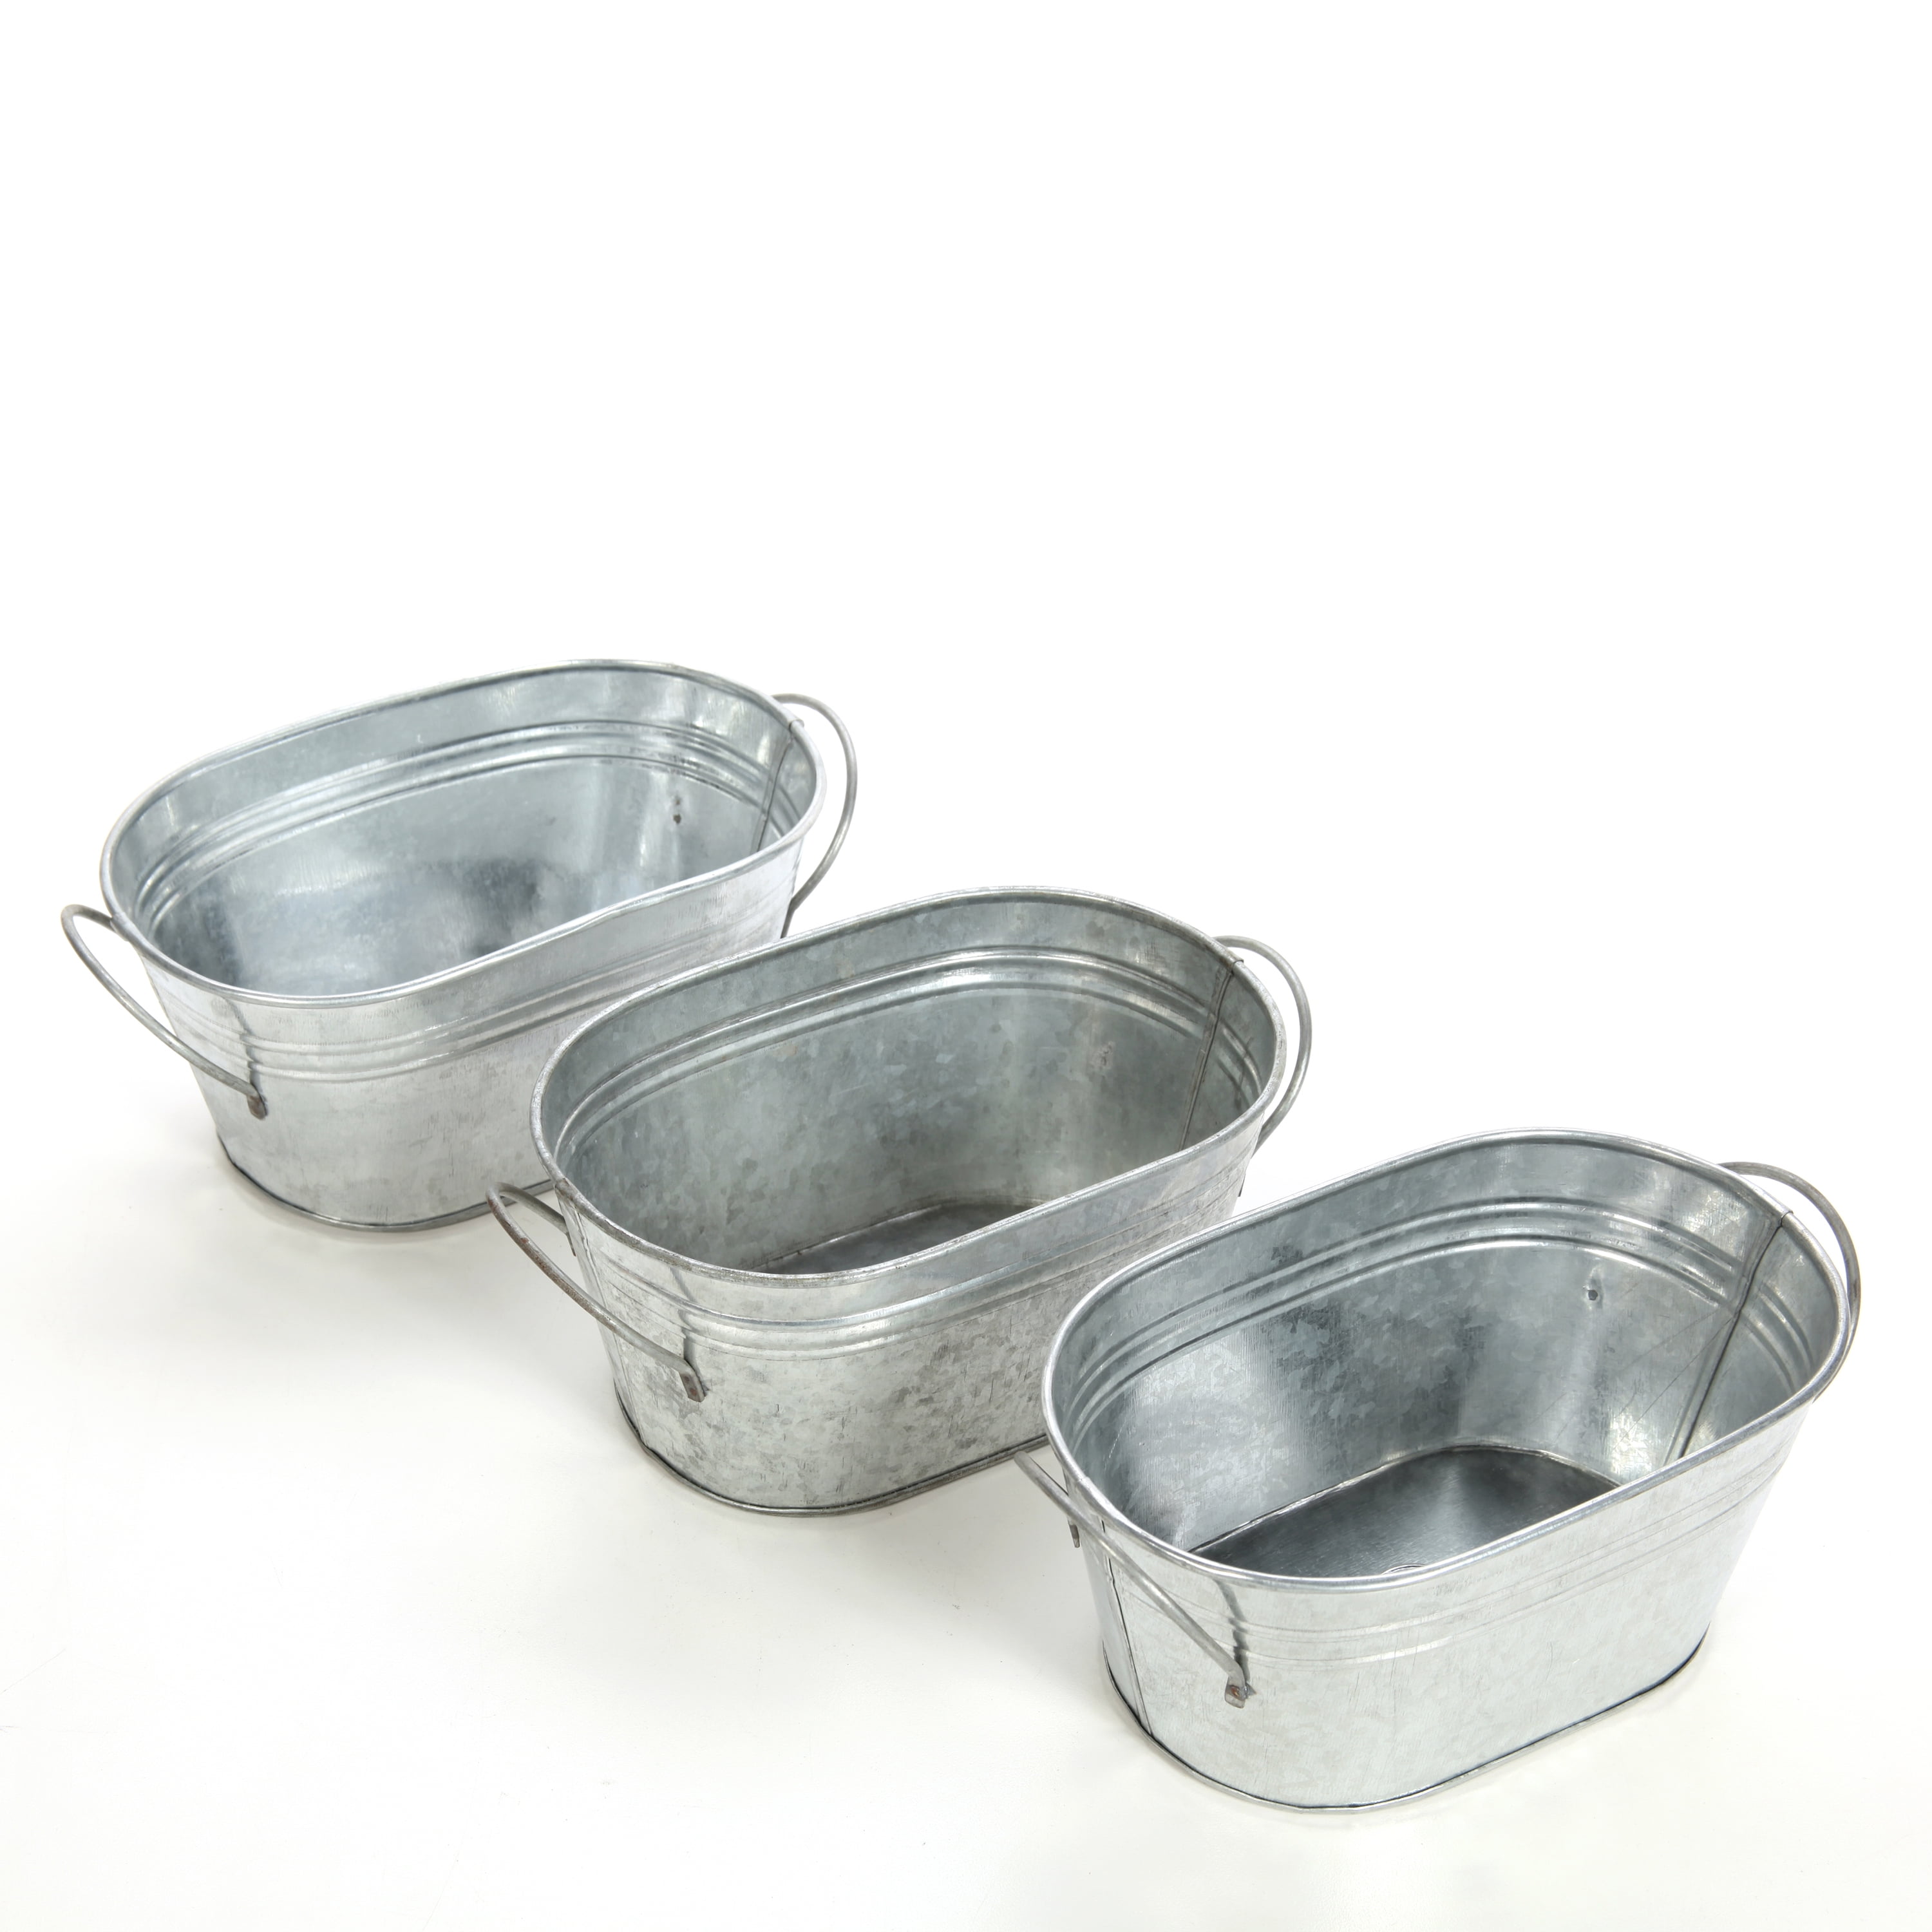 Shallow Oval Planter at Wholesale Prices - NewPro Containers